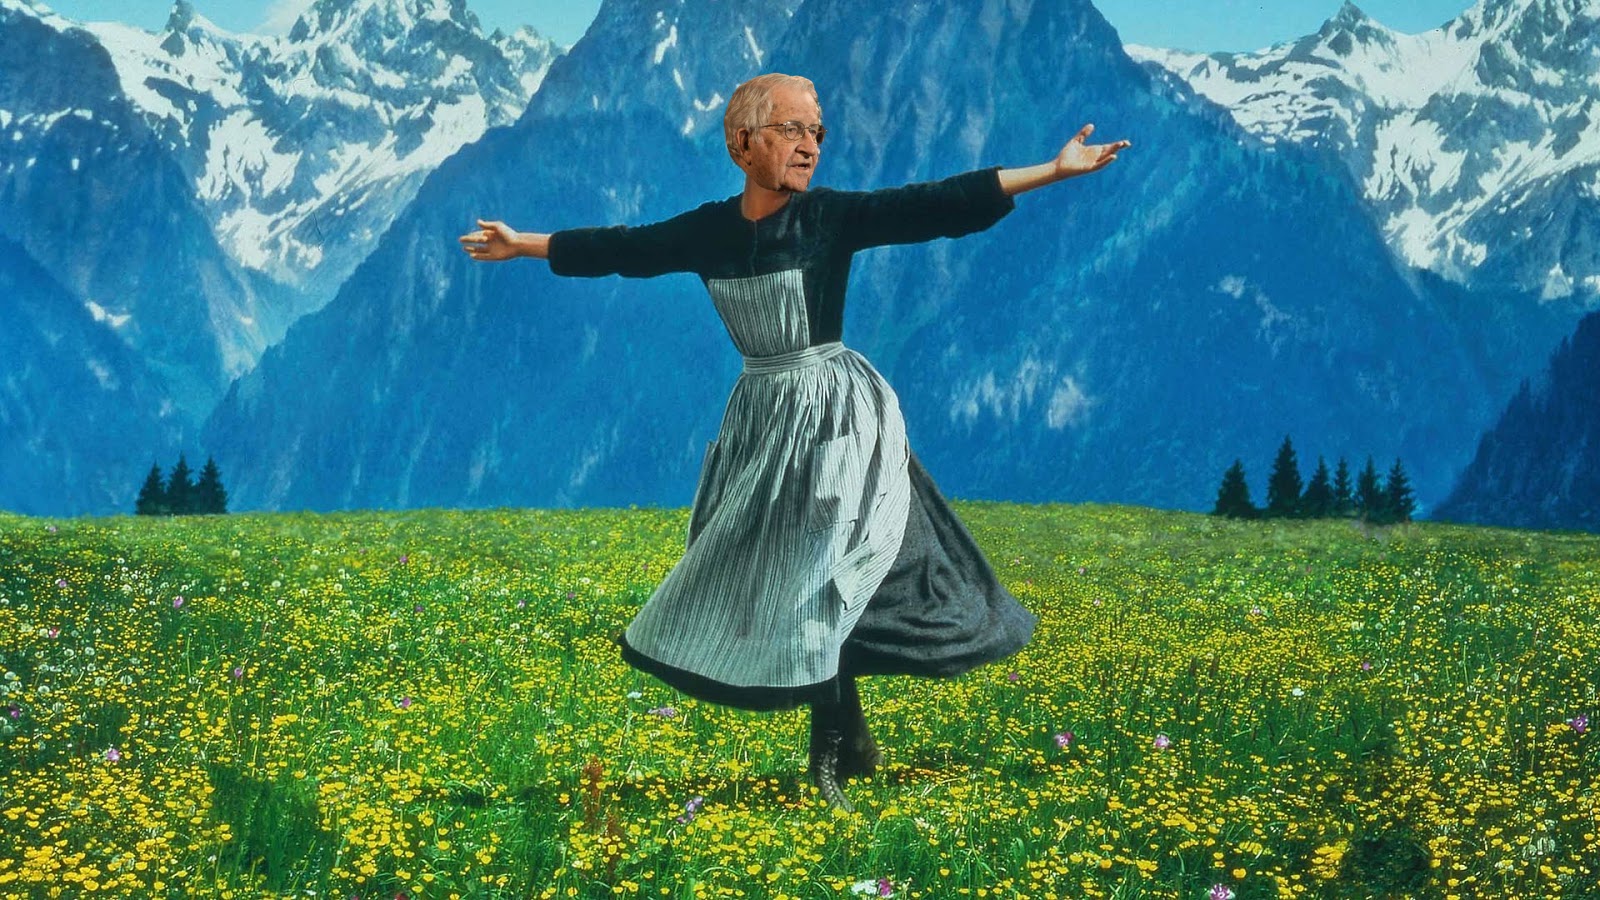 Sound of Music hills with Maria twirling around, but with Noam Chomsky's face photoshoped in